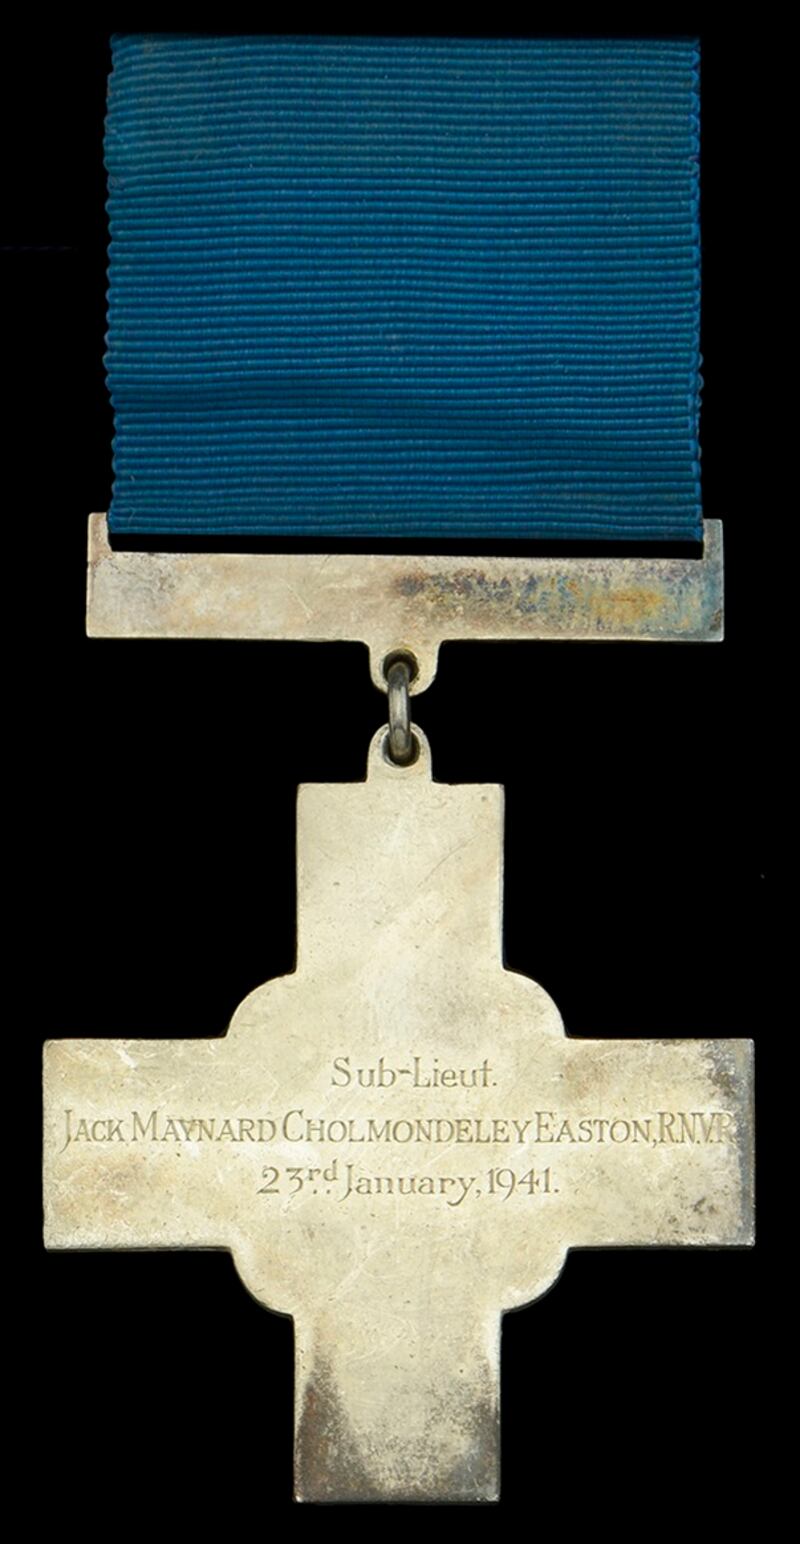 The George Cross medal was awarded to Sub Lt Easton for his work diffusing mines during the Blitz. Noonans Mayfair/PA